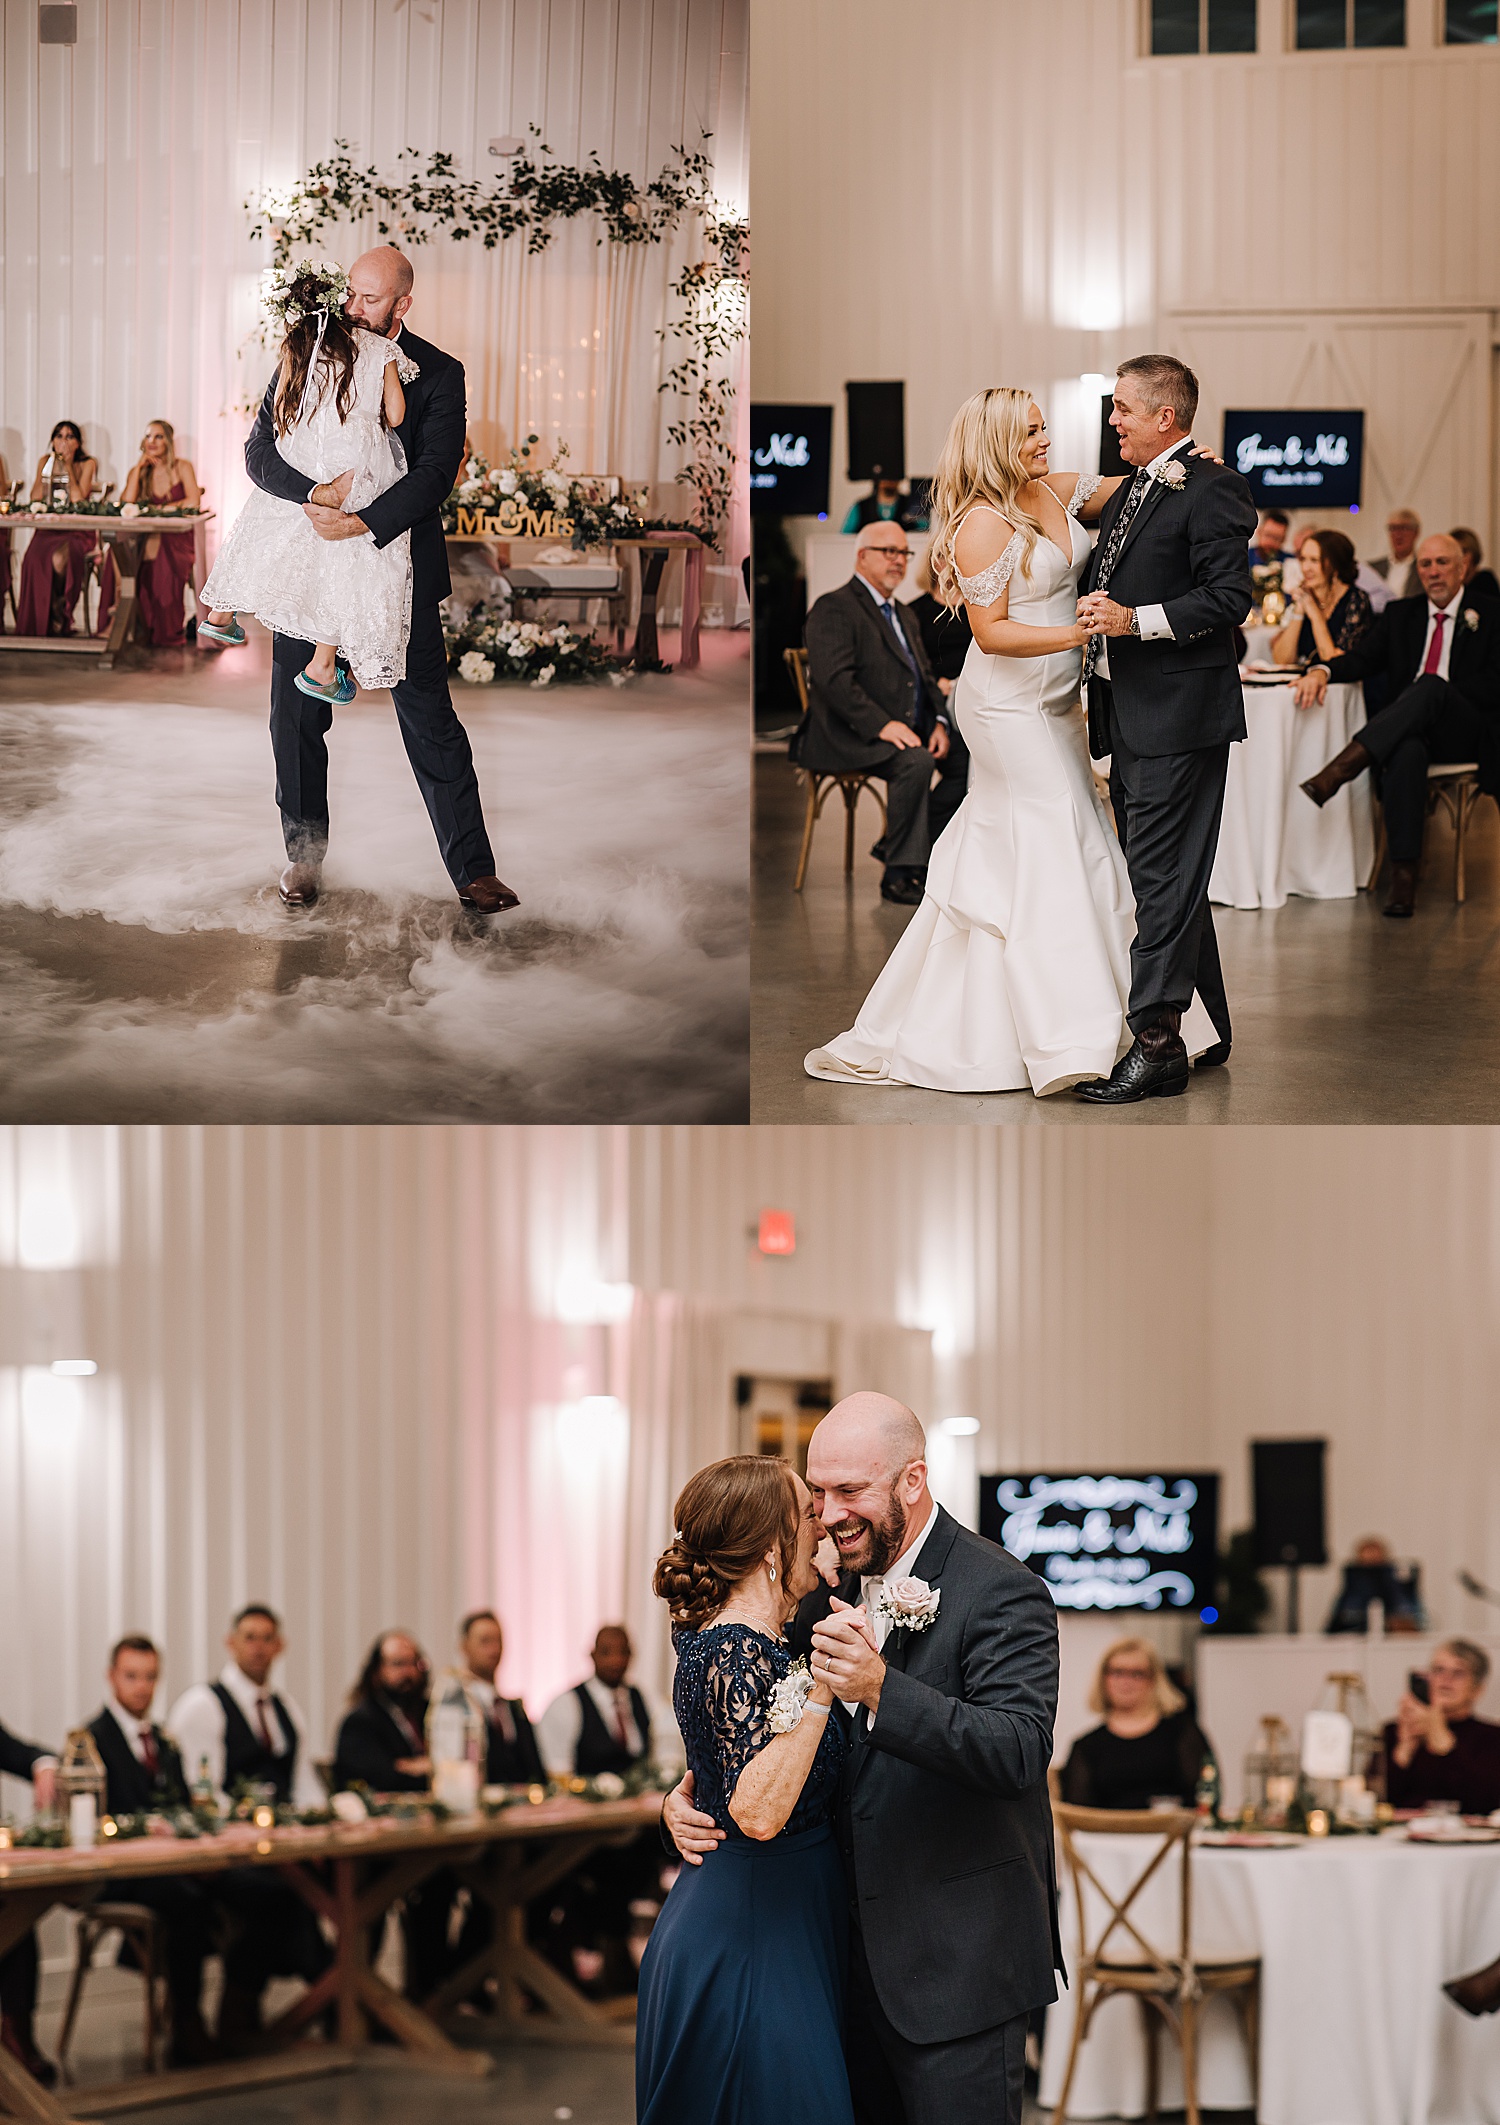 Groom shares a dance with daughter at wedding reception and bride shared a dance with her father 